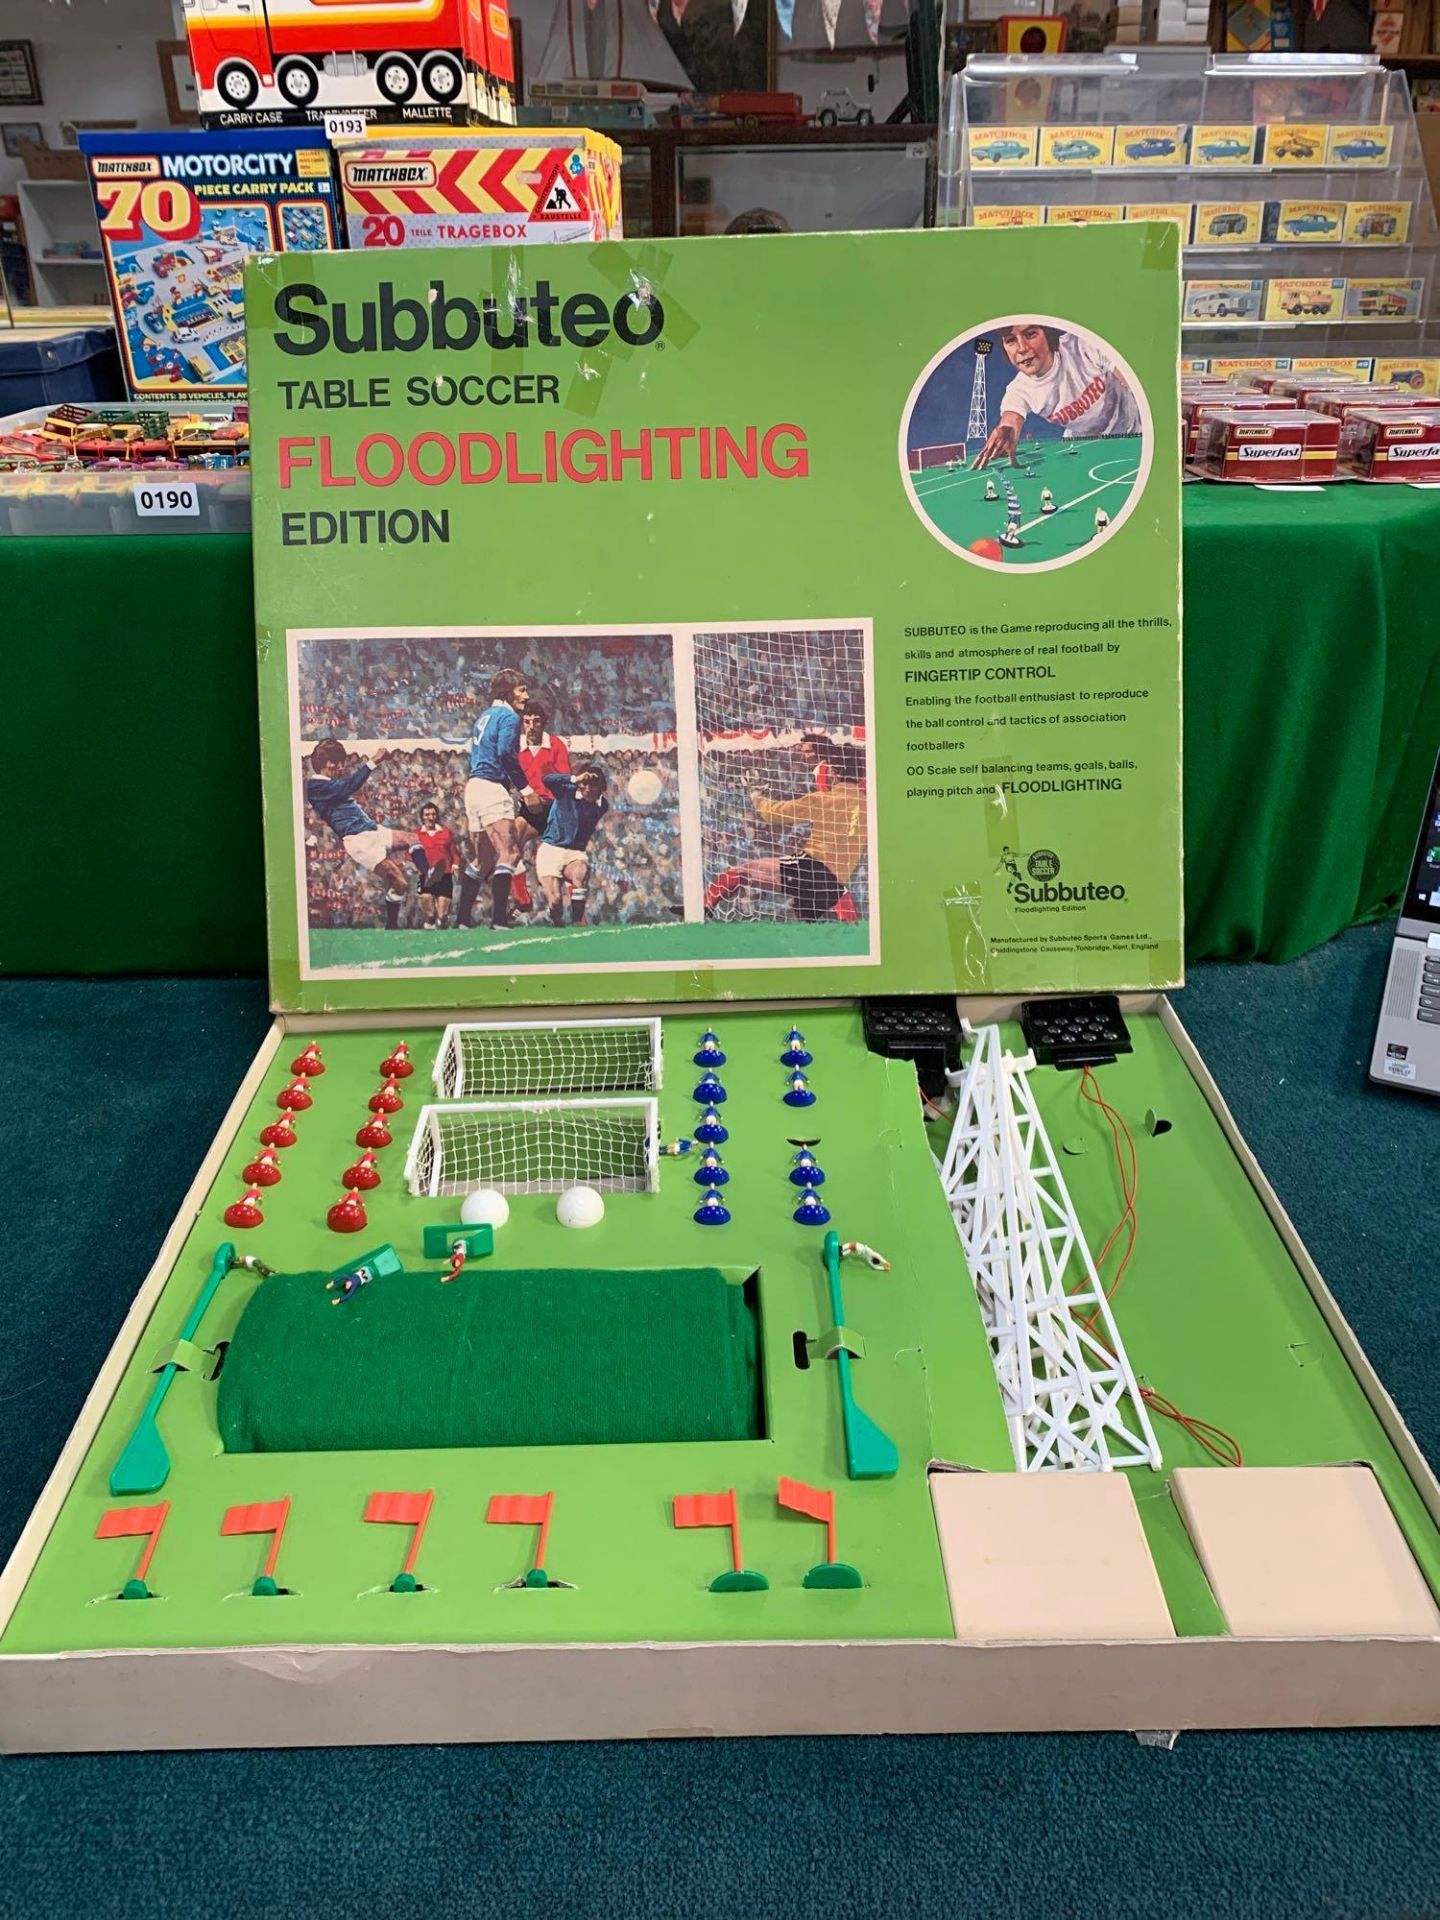 Subbuteo Table Soccer Floodlight Edition - Image 3 of 8